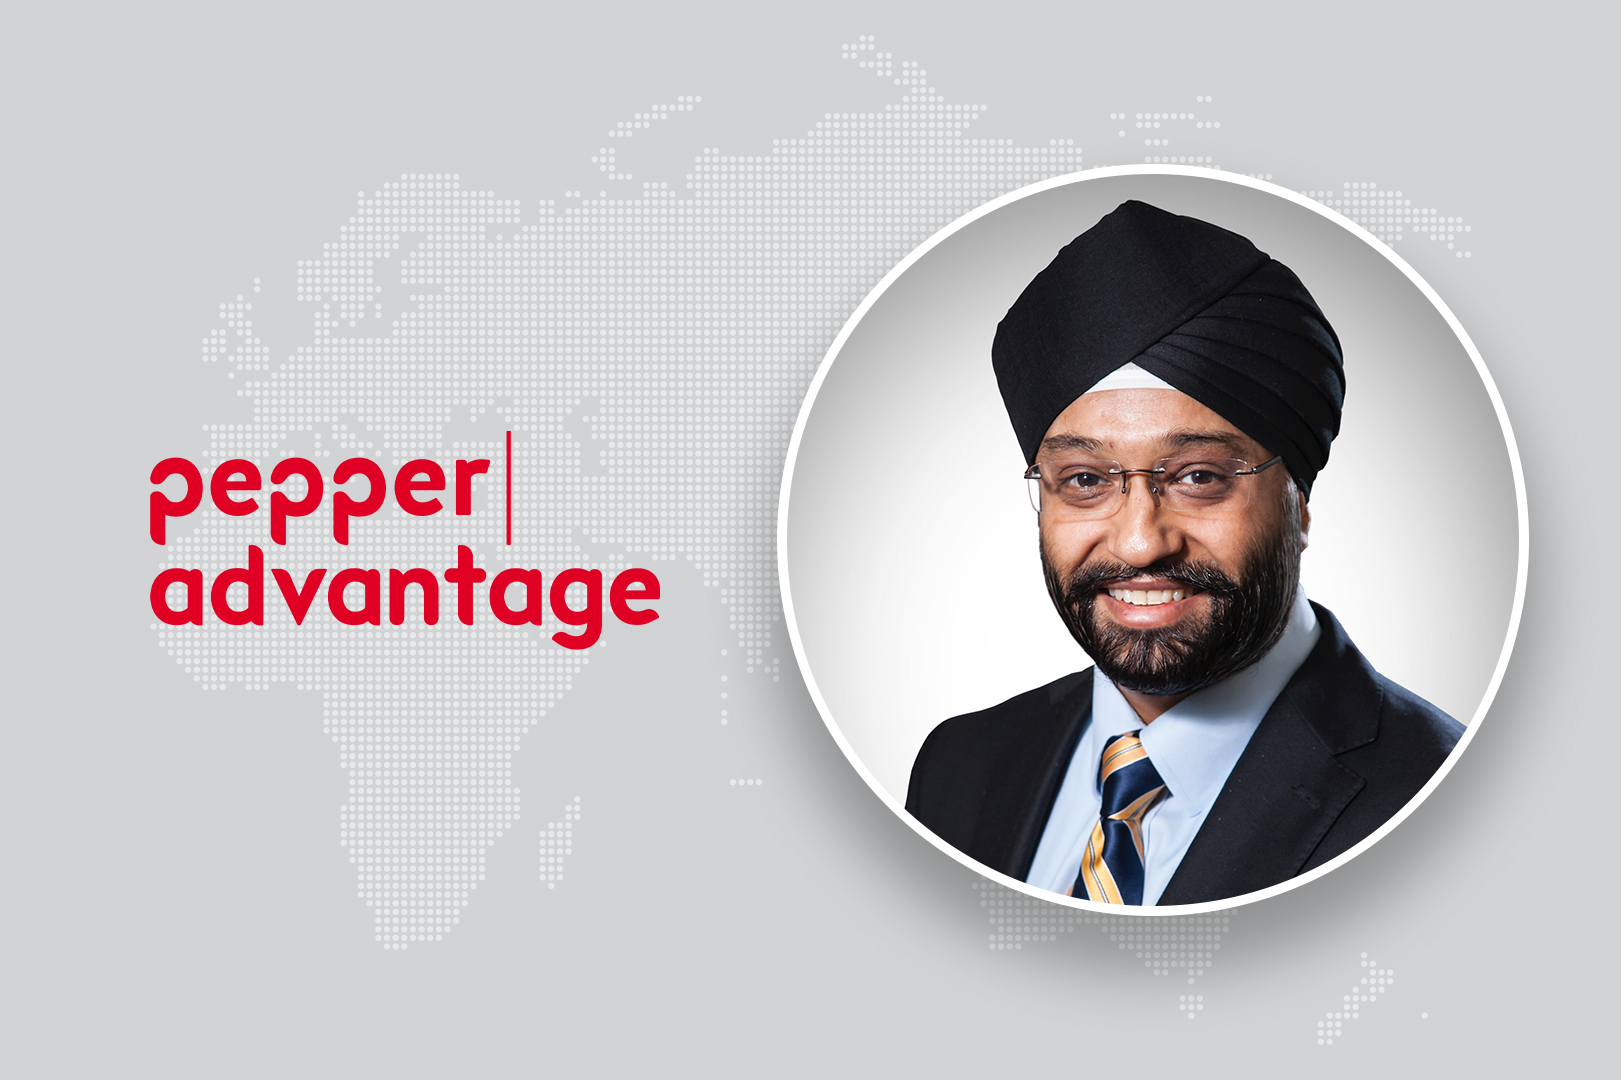 Chief Technology Officer Pepper Advantage, Narinder Auluck